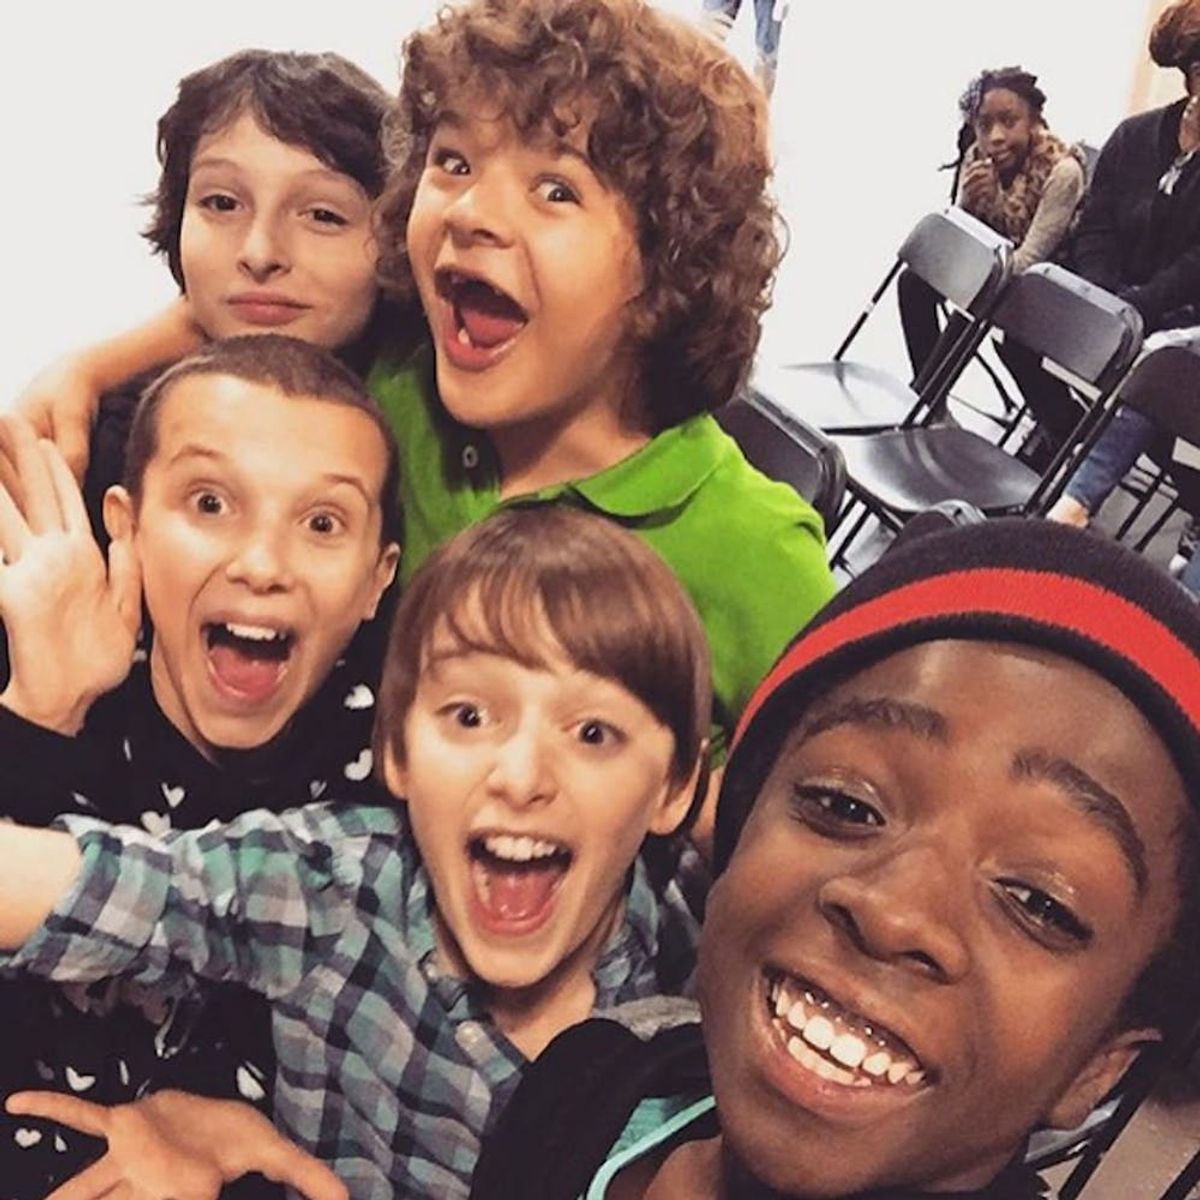 11 Times the Kids from Stranger Things Gave Us Serious #Squadgoals